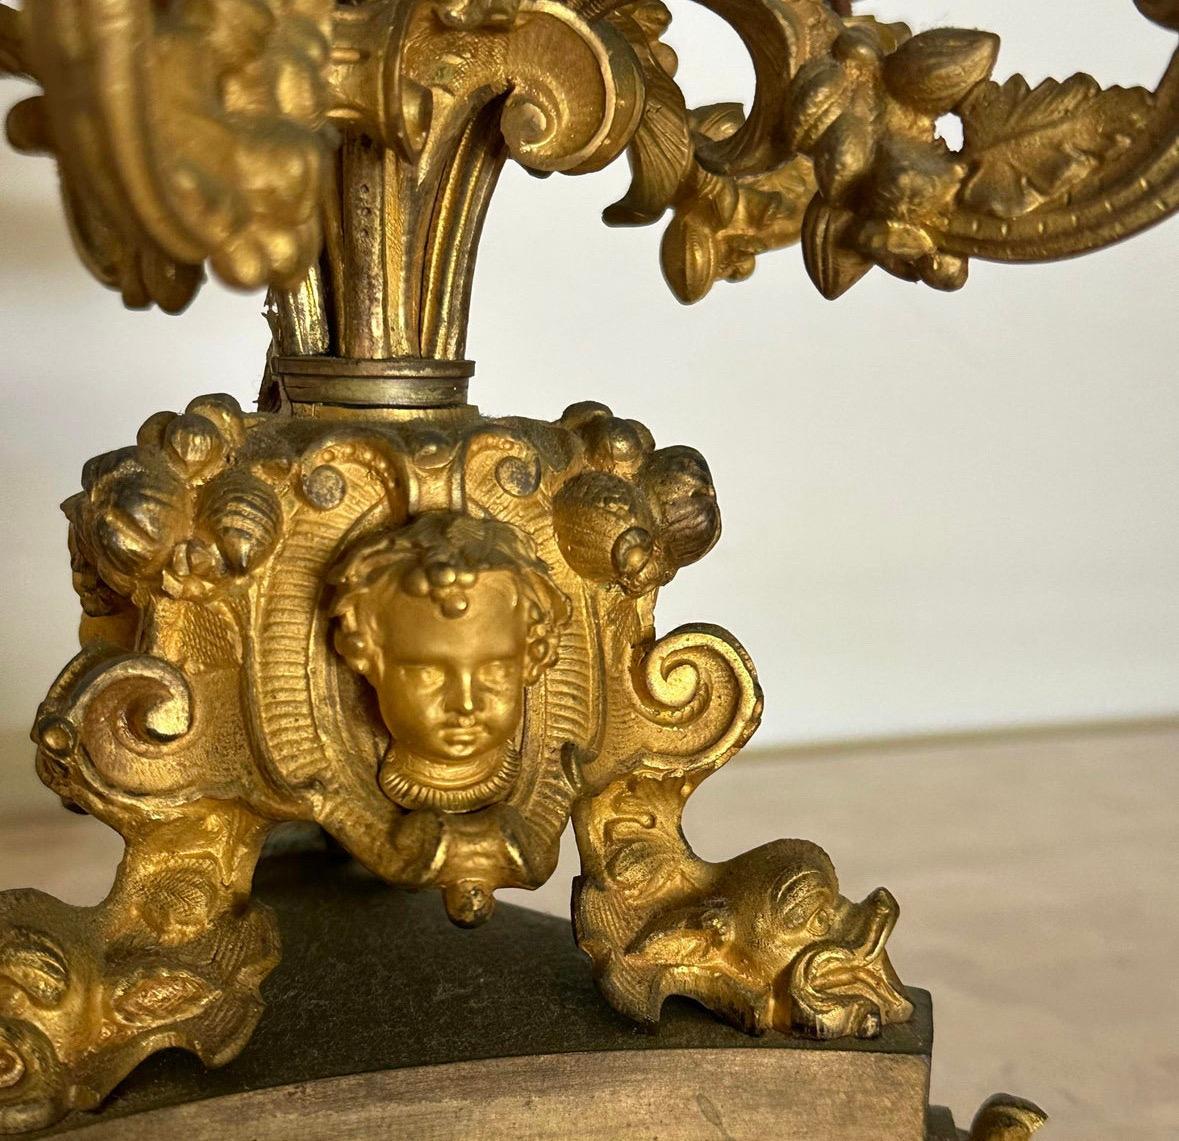 19th Century French Ormolu Candelabra Lamp With Tole Shade For Sale 2